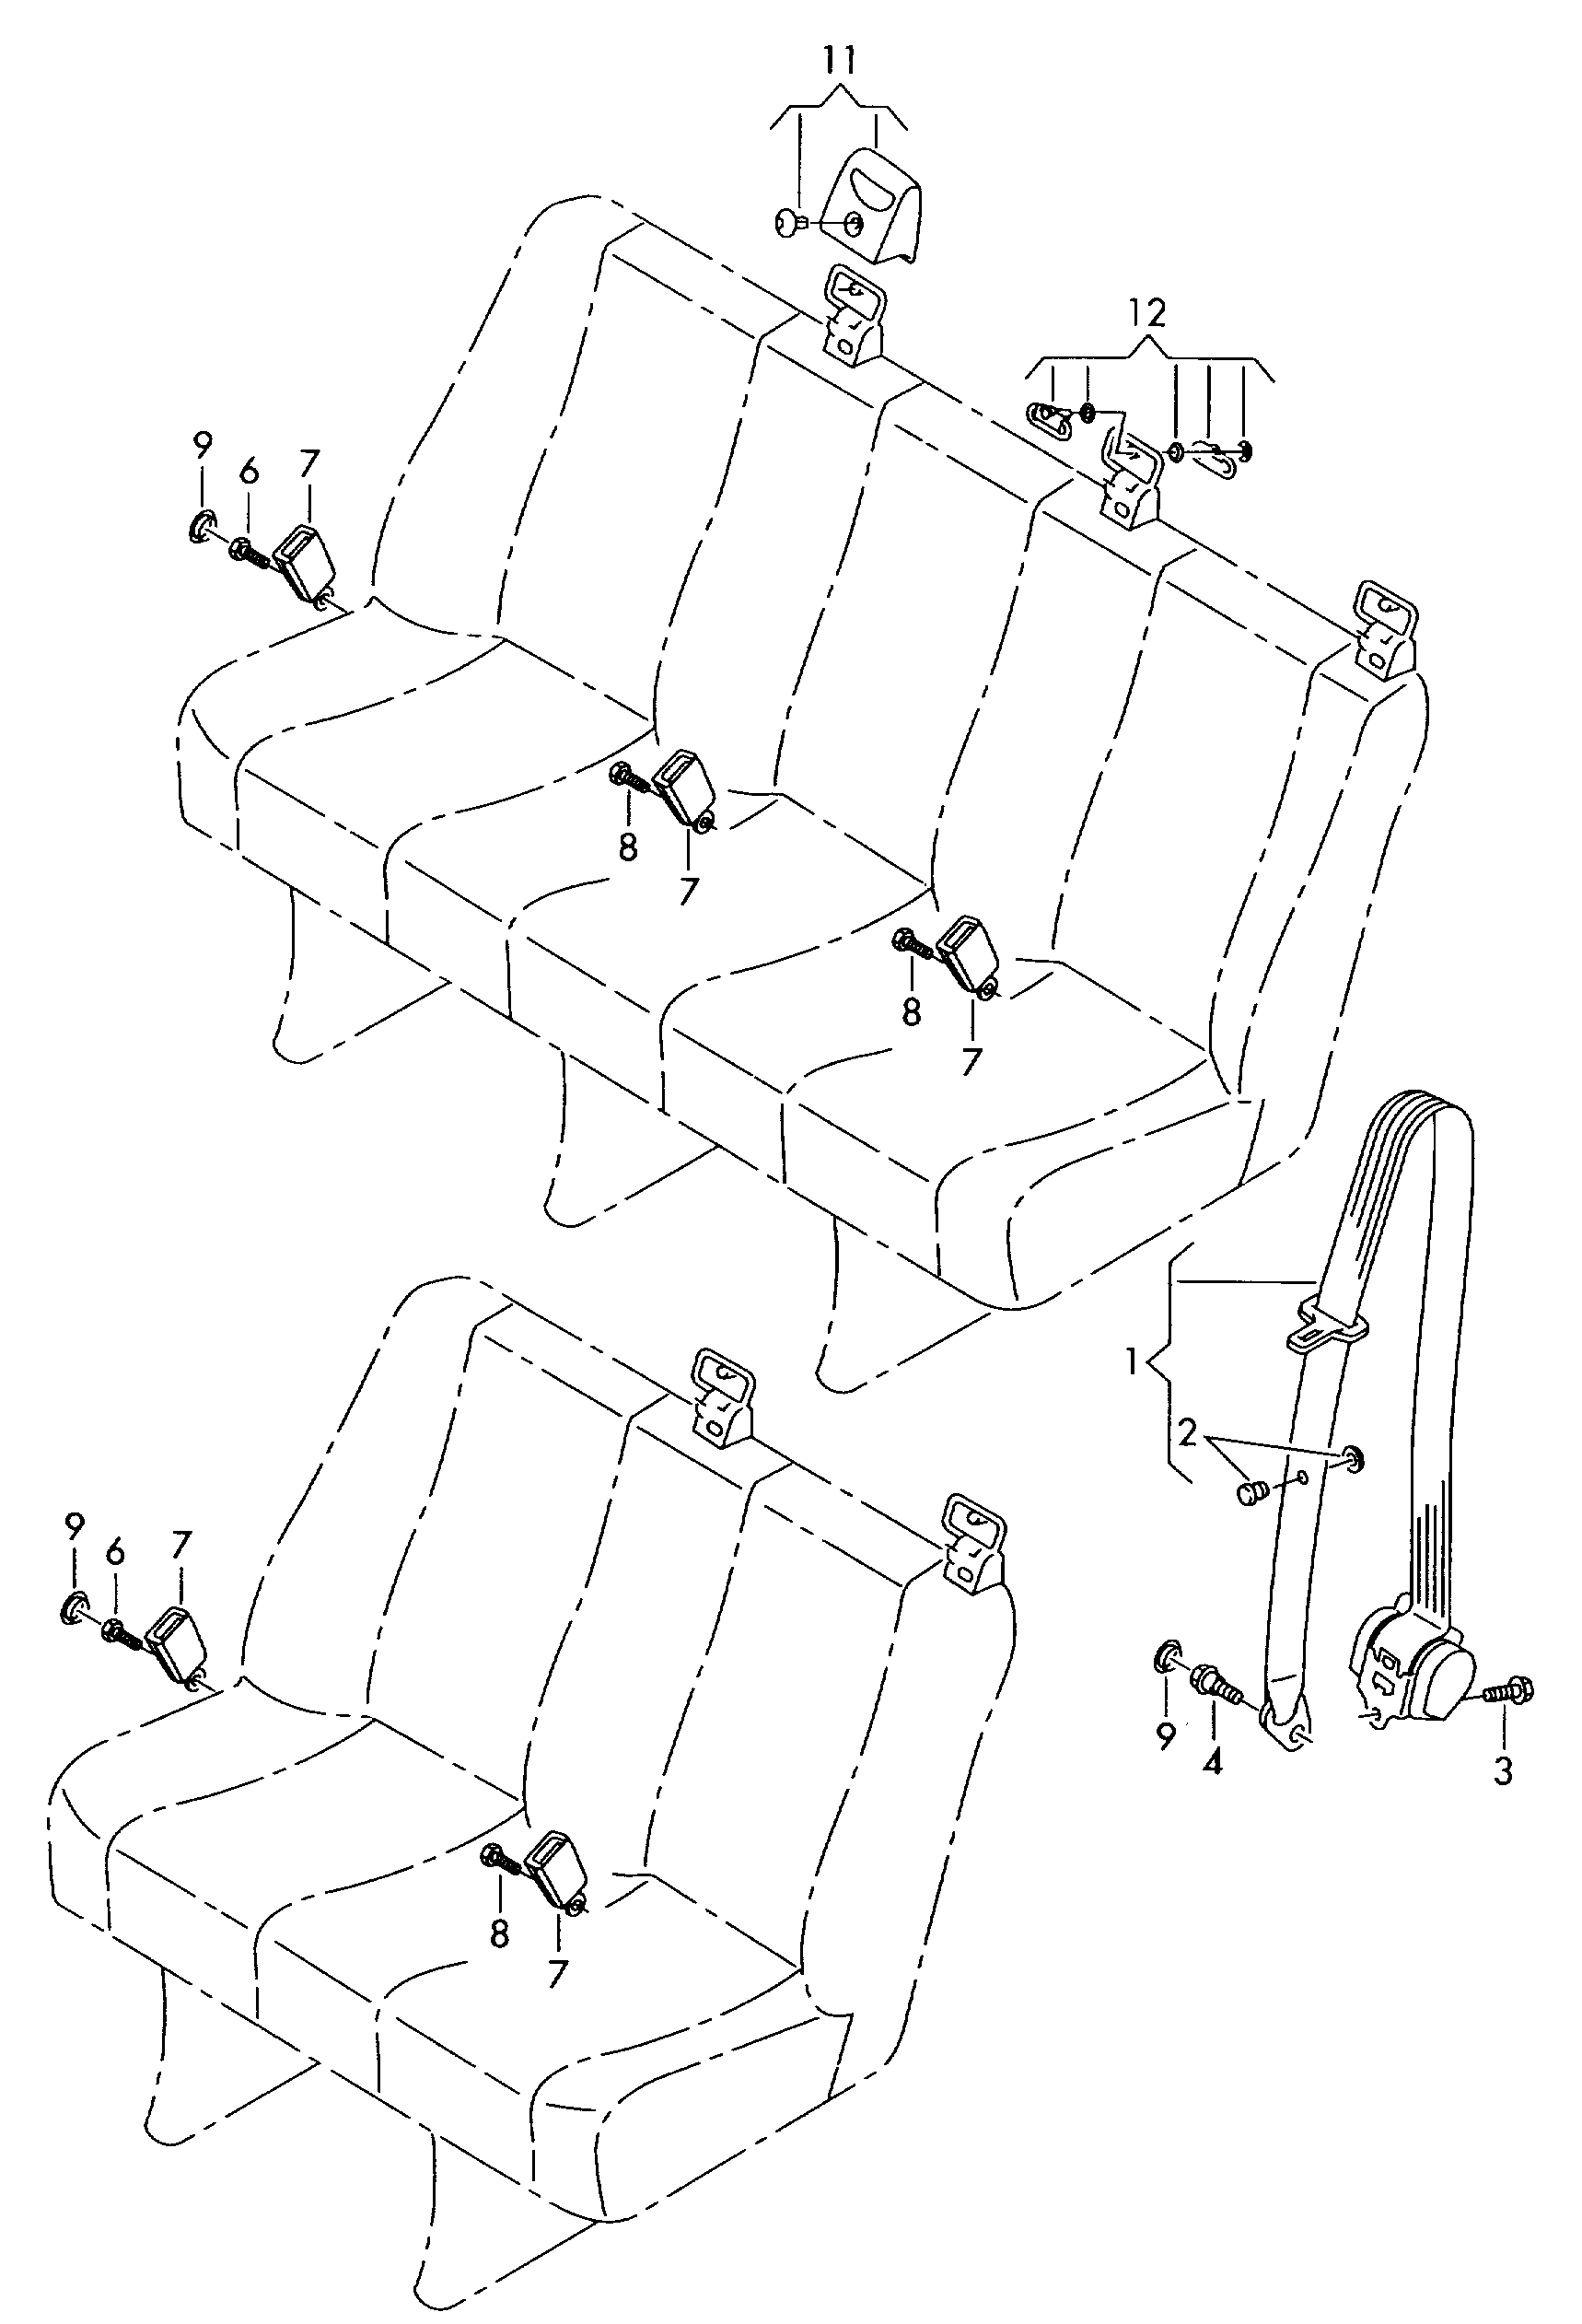 three-point seat belt in<br>passenger compartment 3. seat bench - Crafter - cr